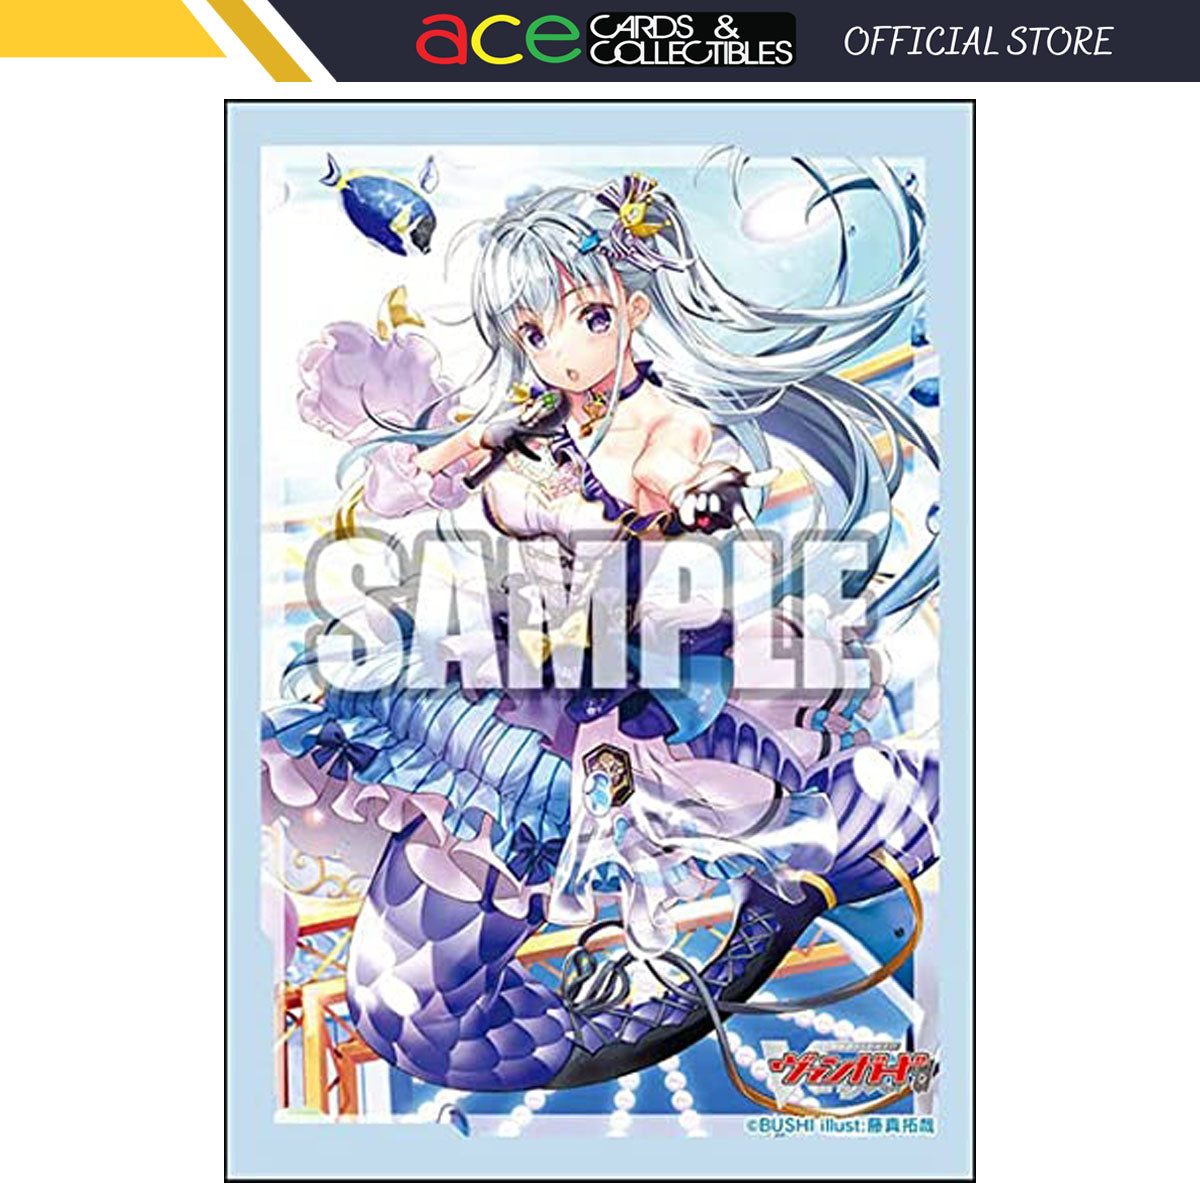 CardFight Vanguard OverDress Sleeve Collection Mini Vol. 590 "Astesice, Kairi"-Bushiroad-Ace Cards & Collectibles